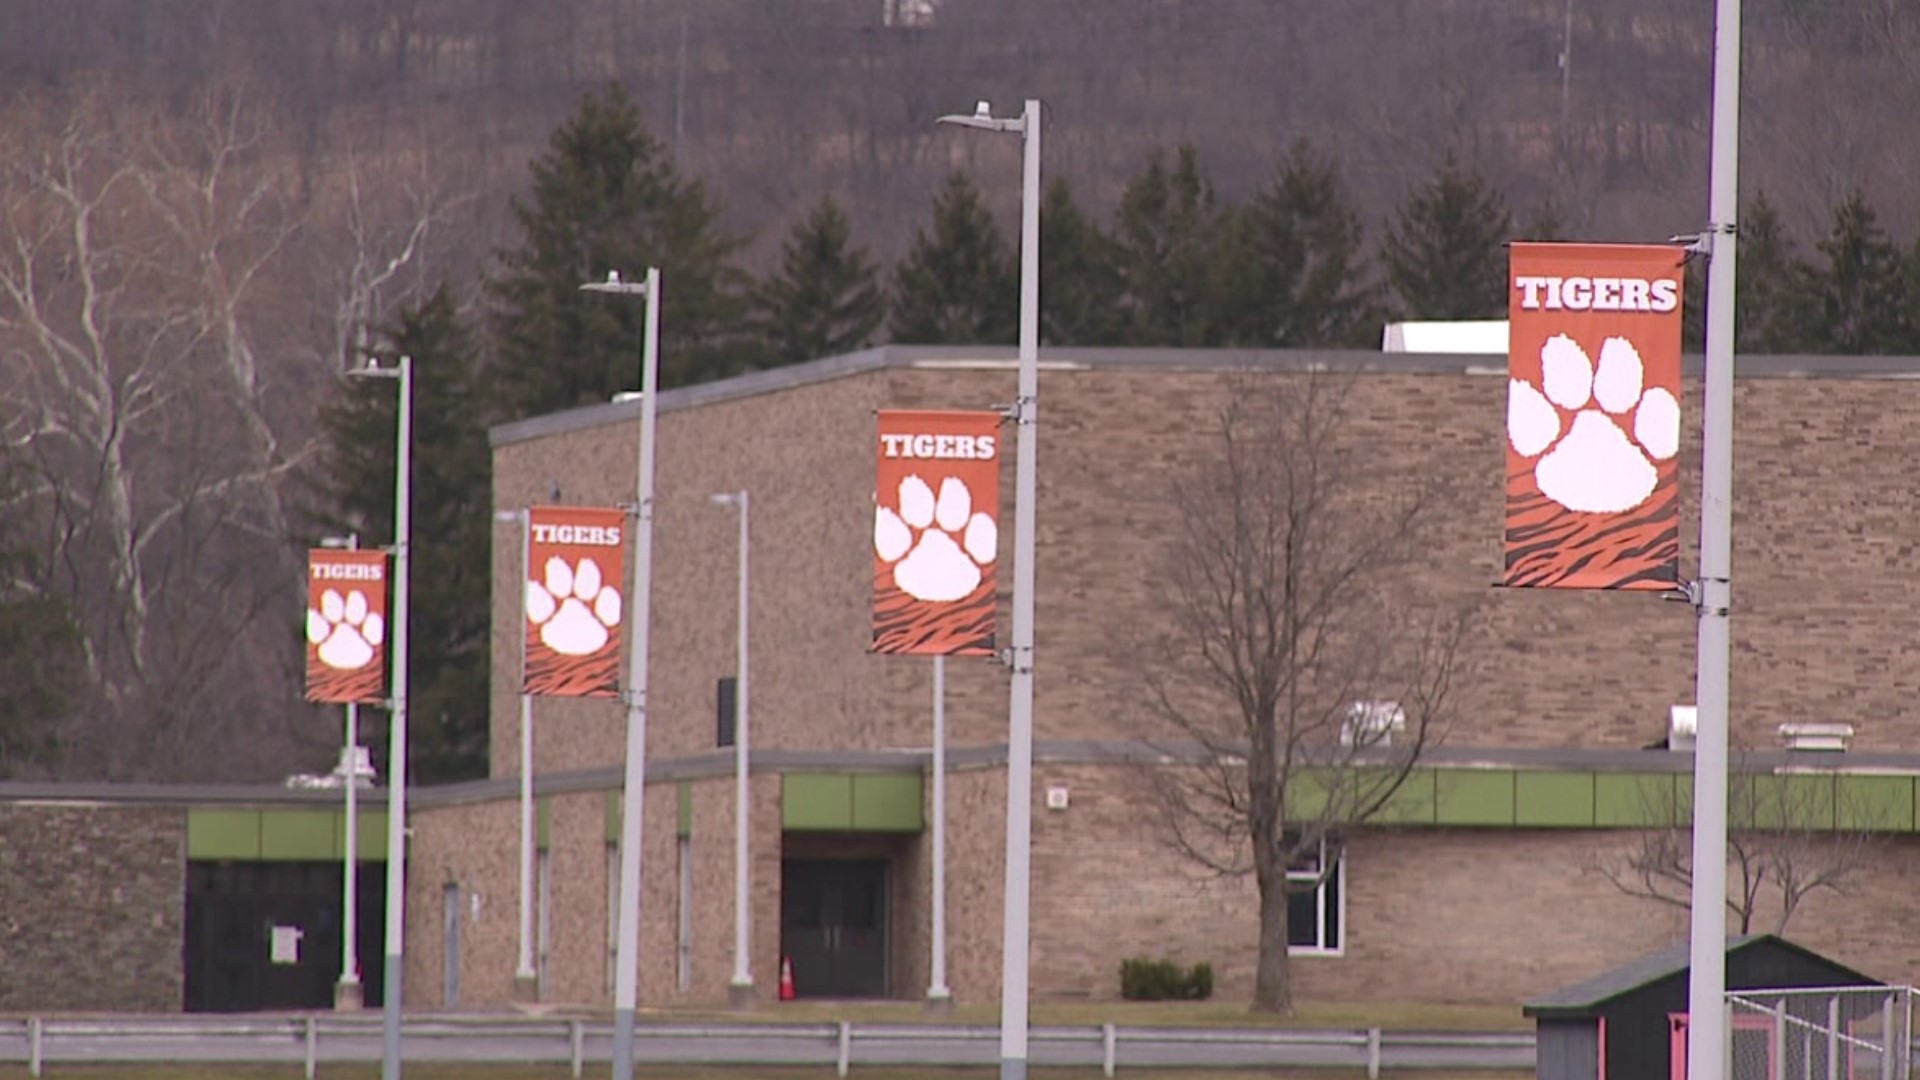 A former gym teacher from Wyoming County again faces charges of having inappropriate contact with students.